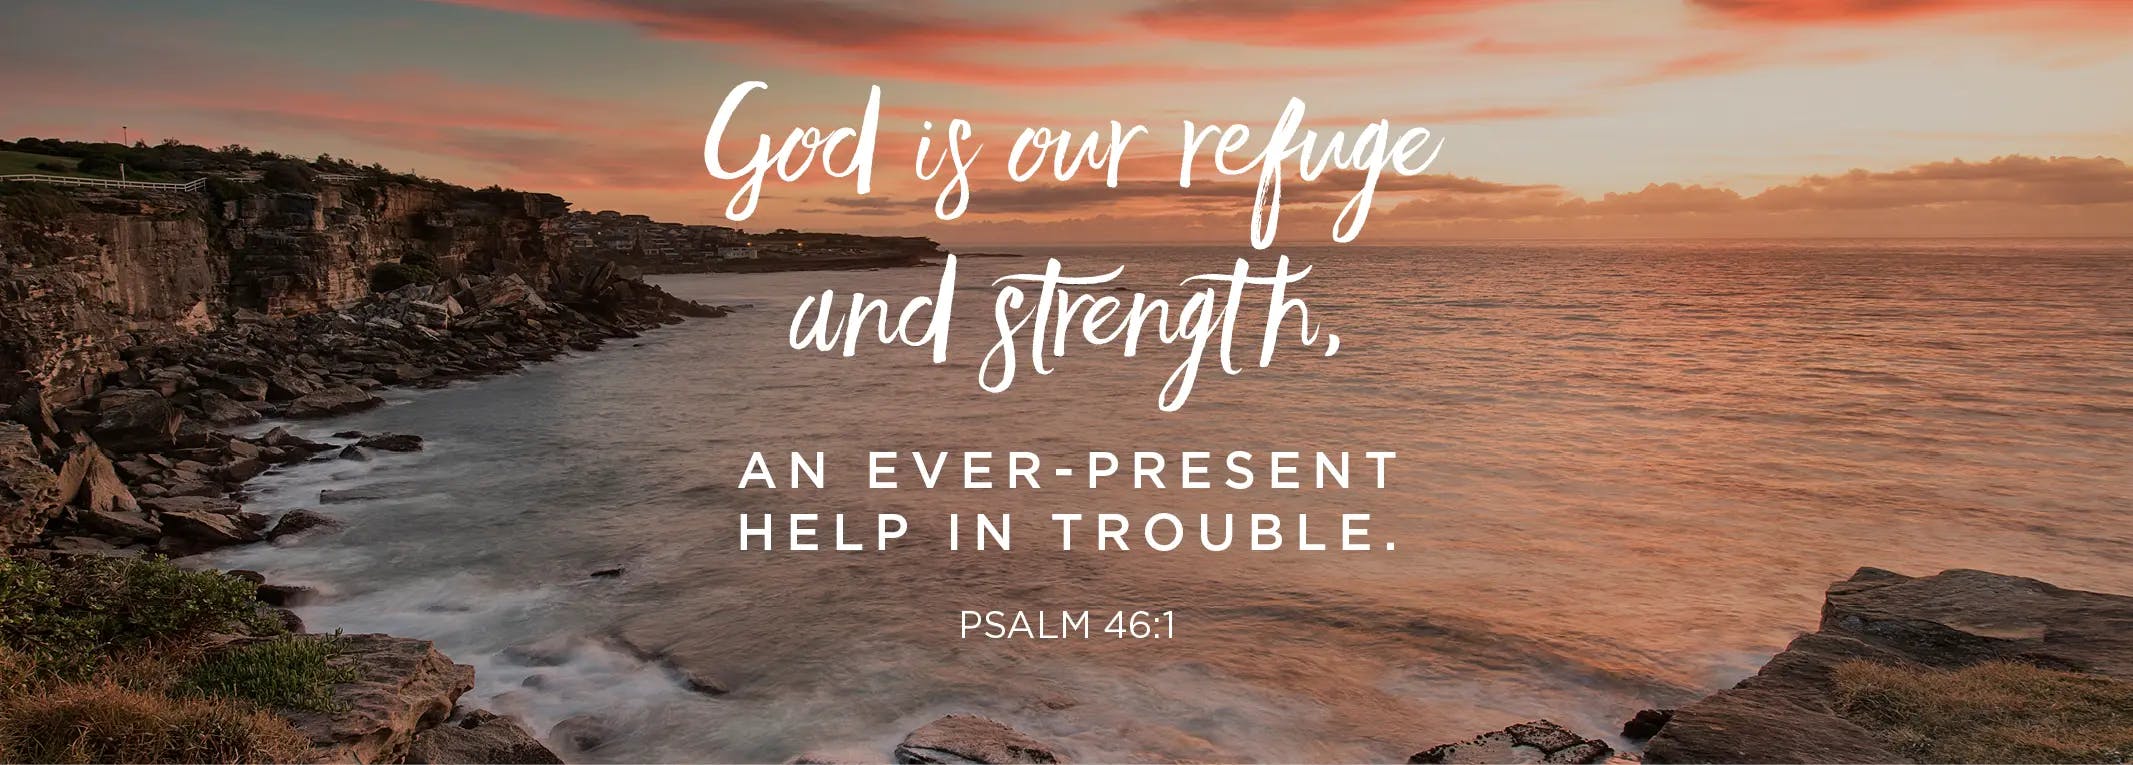 Psalm 46:1 - God is our refuge and strength an ever-present help in trouble